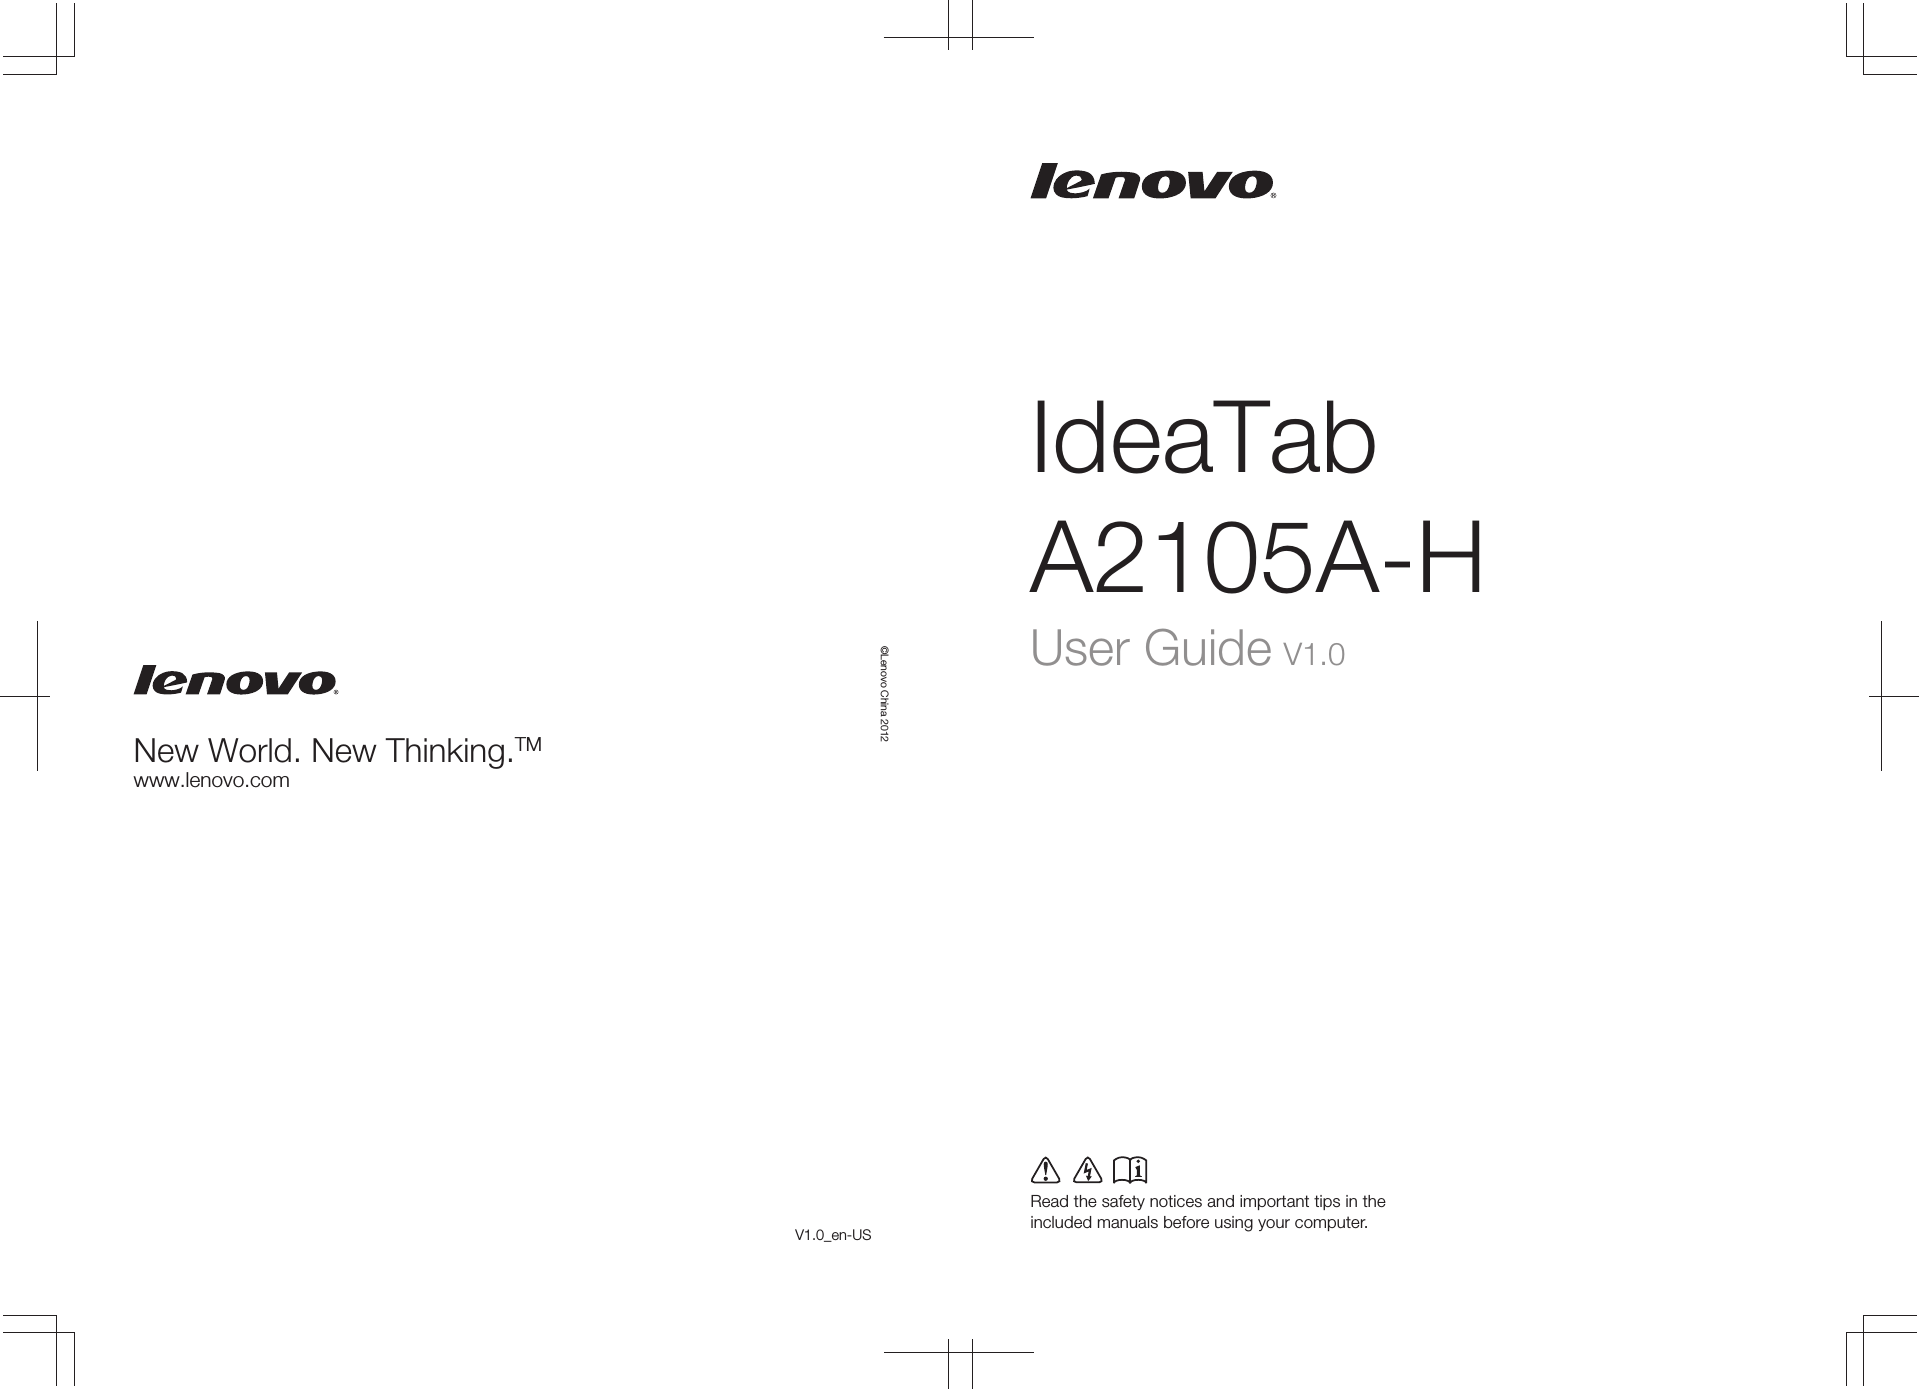 IdeaTab A2105A-HRead the safety notices and important tips in the included manuals before using your computer.©Lenovo China 2012New World. New Thinking.TMwww.lenovo.comUser Guide V1.0V1.0_en-US